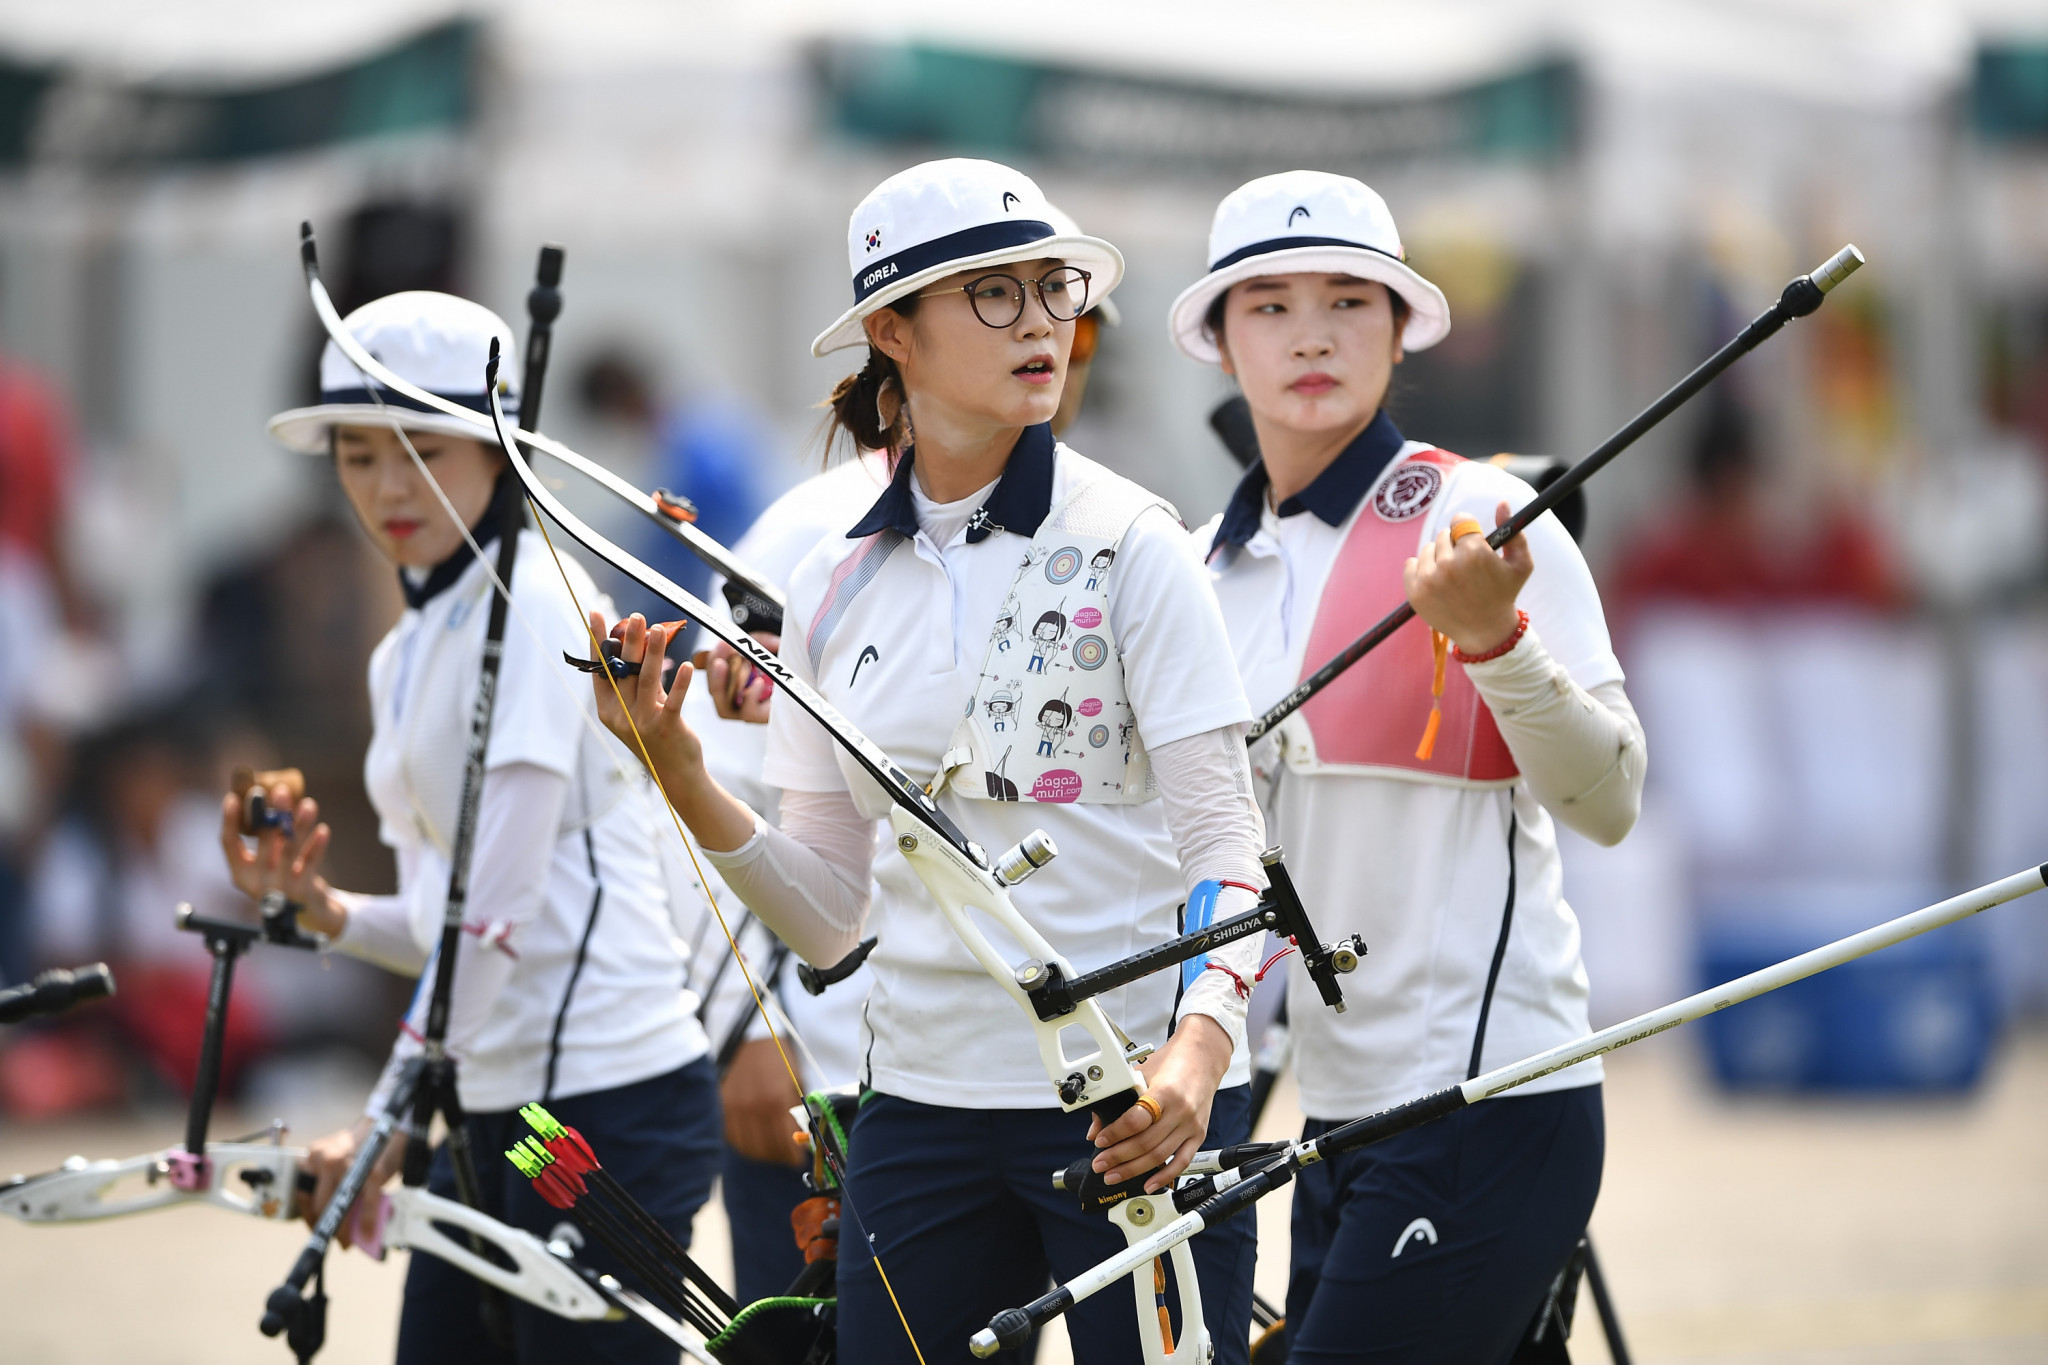 South Korea's archery team's preparations have been dealt a blow after being forced to pull out of three Archery World Cup events due to COVID-19 restrictions ©Getty Images